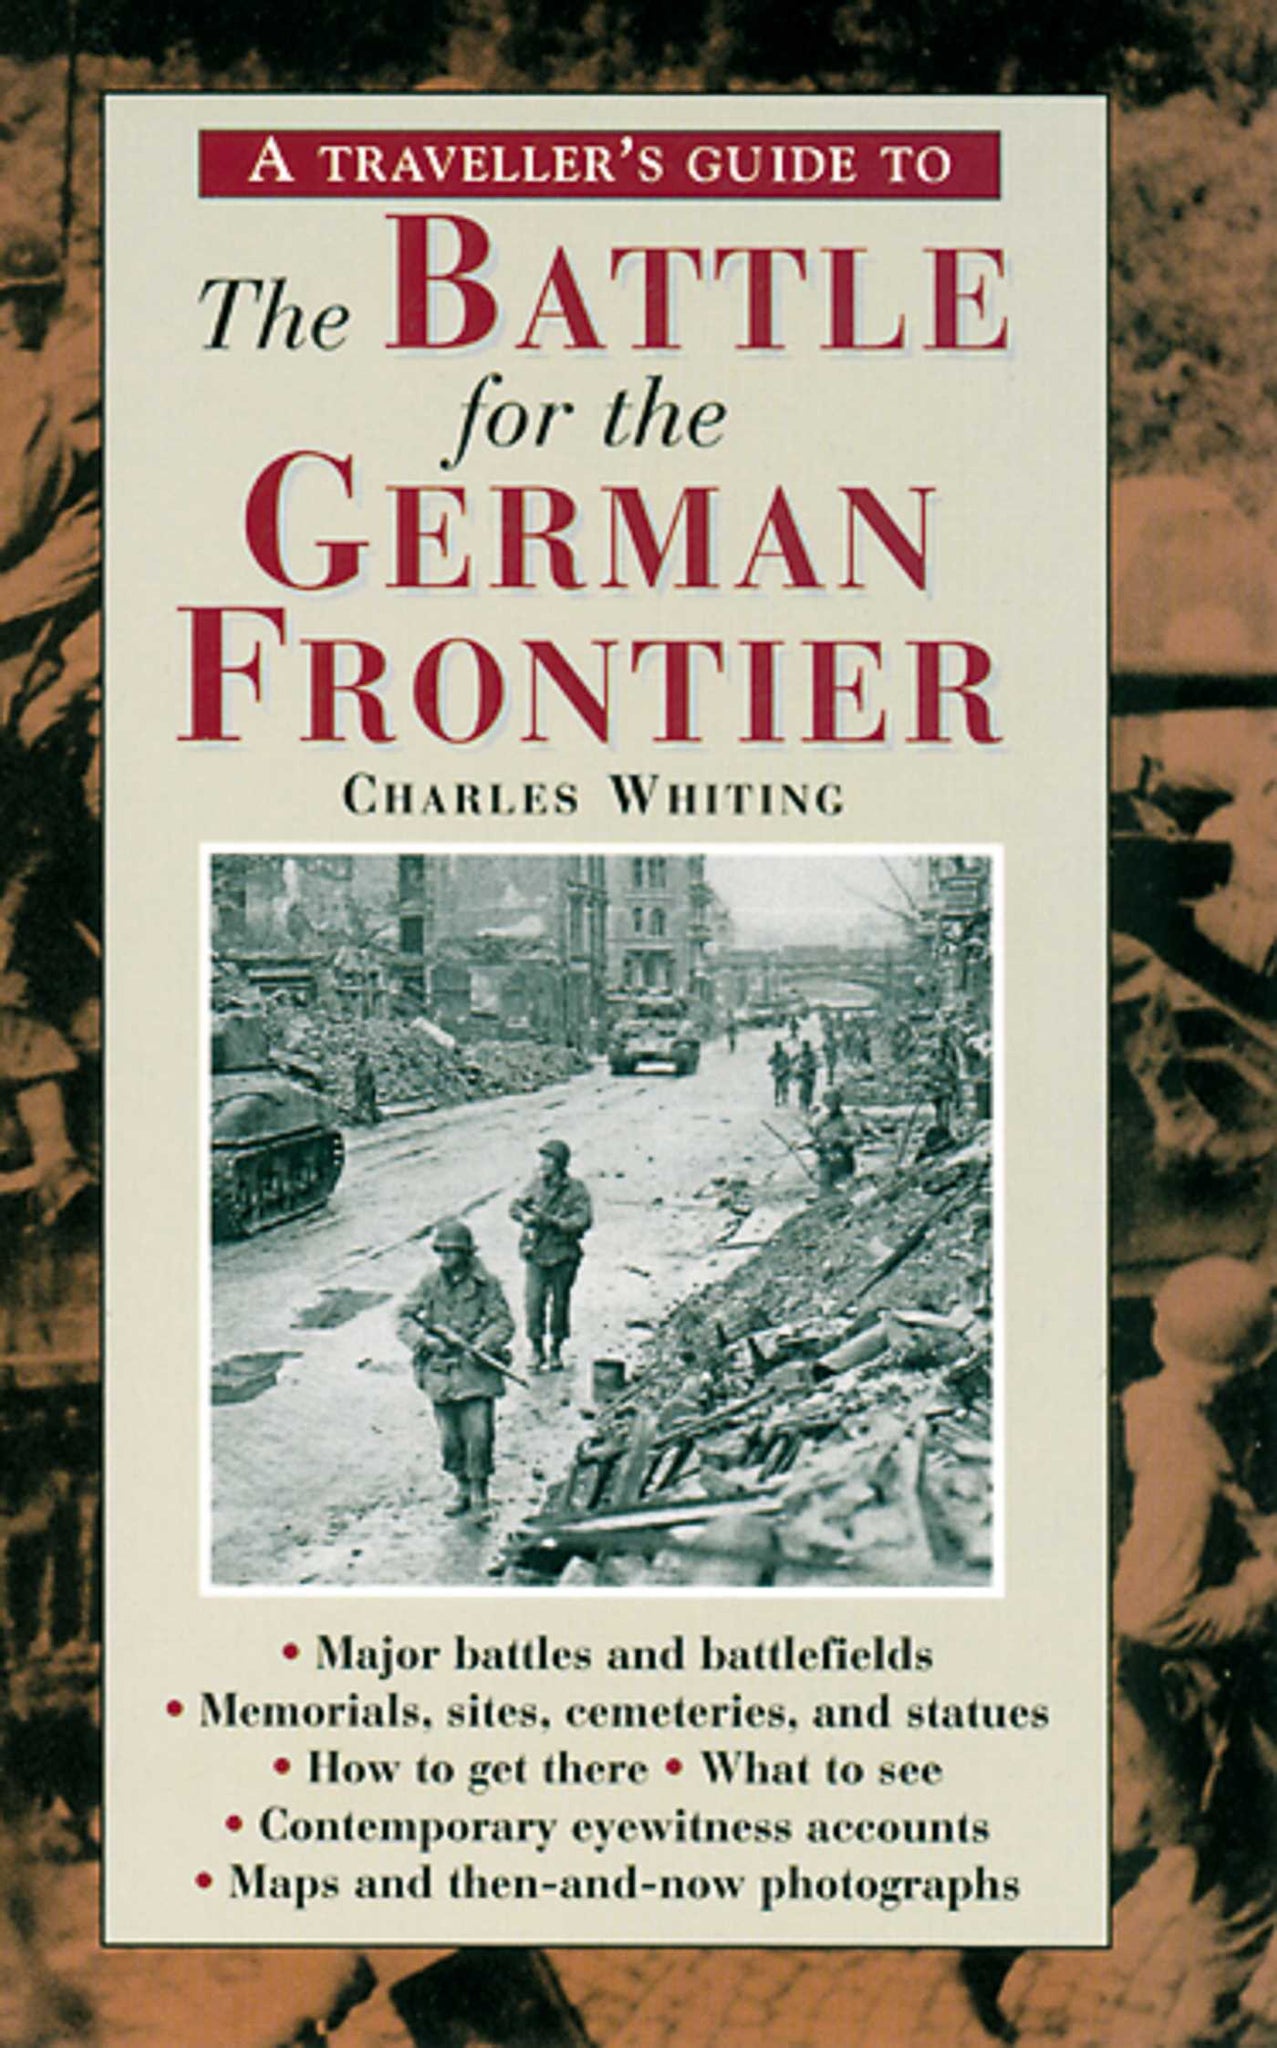 A Traveller's Guide to Battle of the German Frontier